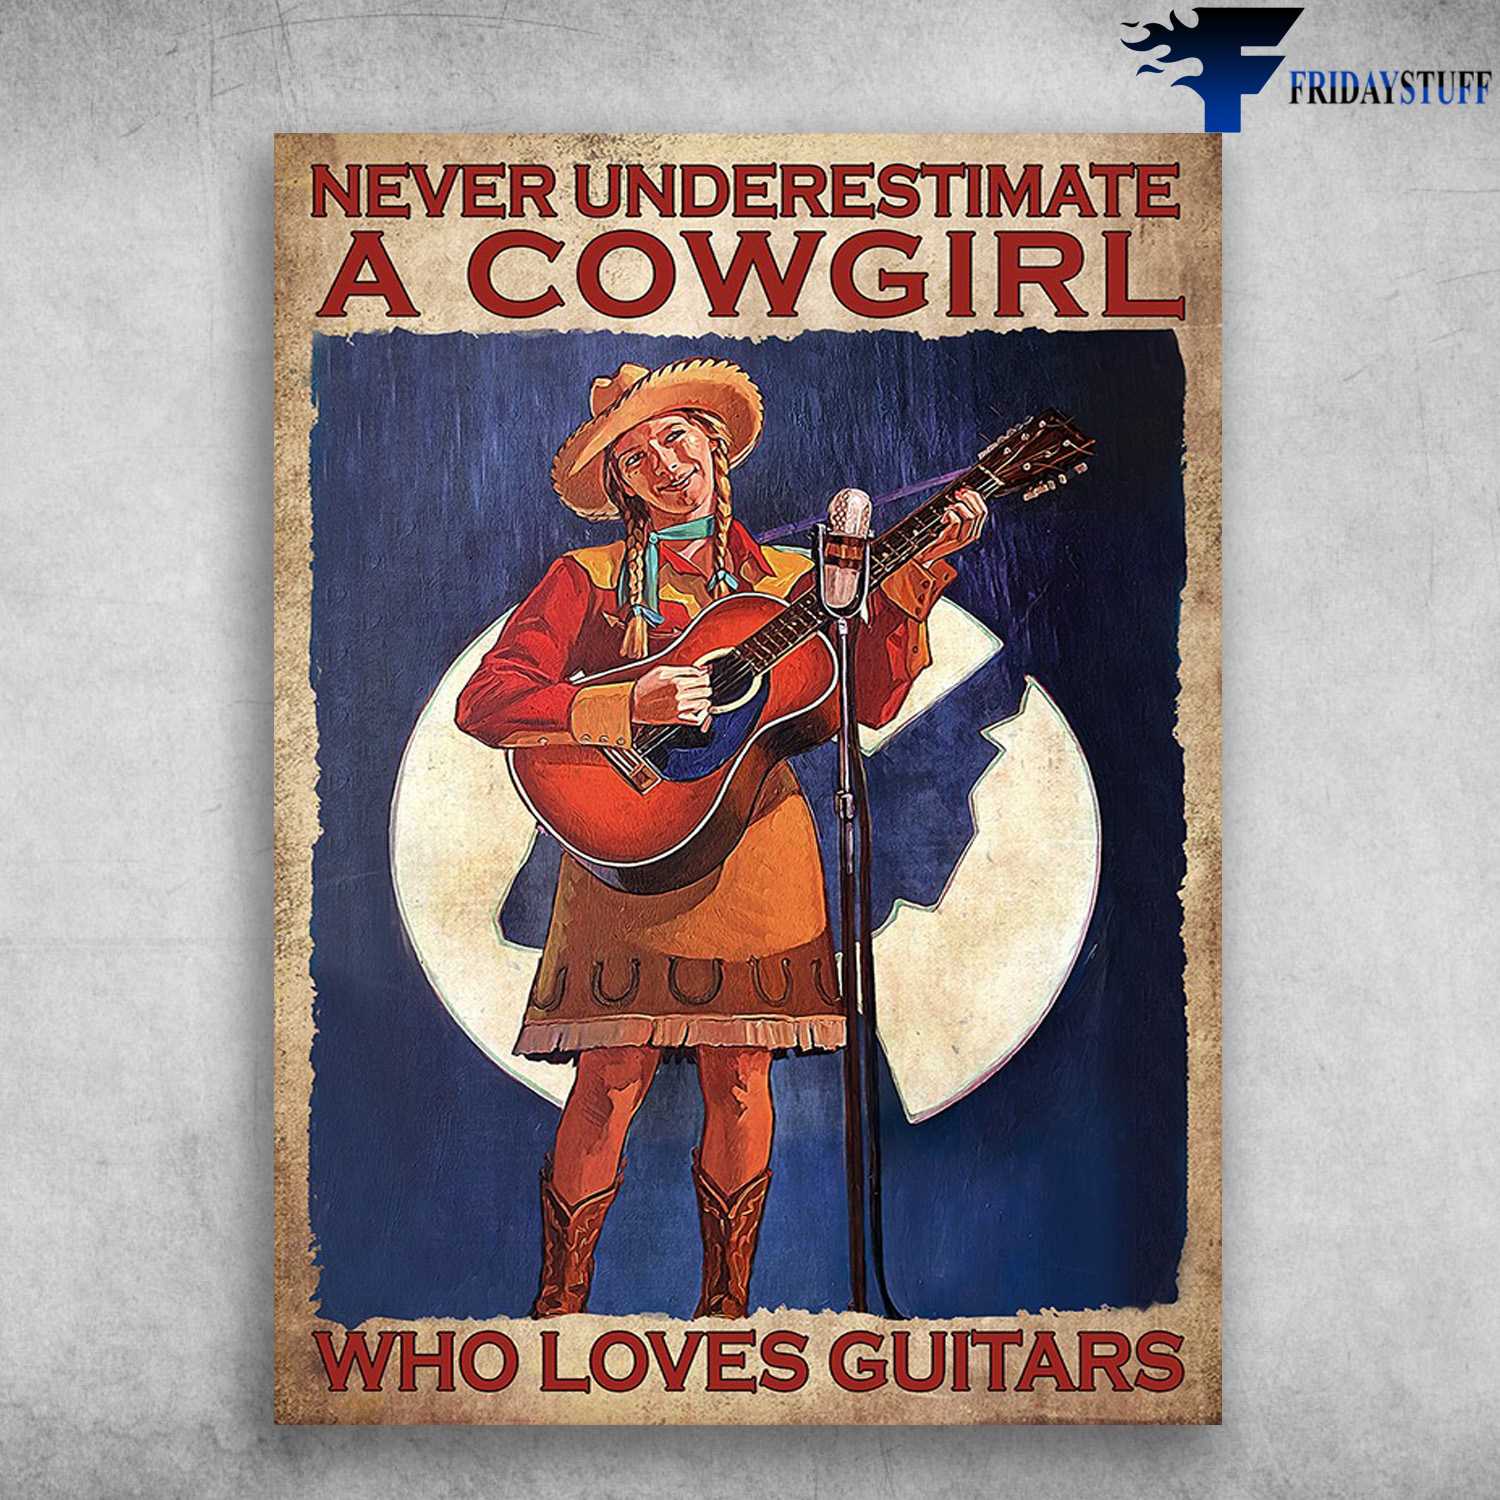 Cowgirl Guitar, Guitar Lover - Never Underestimate A Cowgirl, Who Loves Guitars